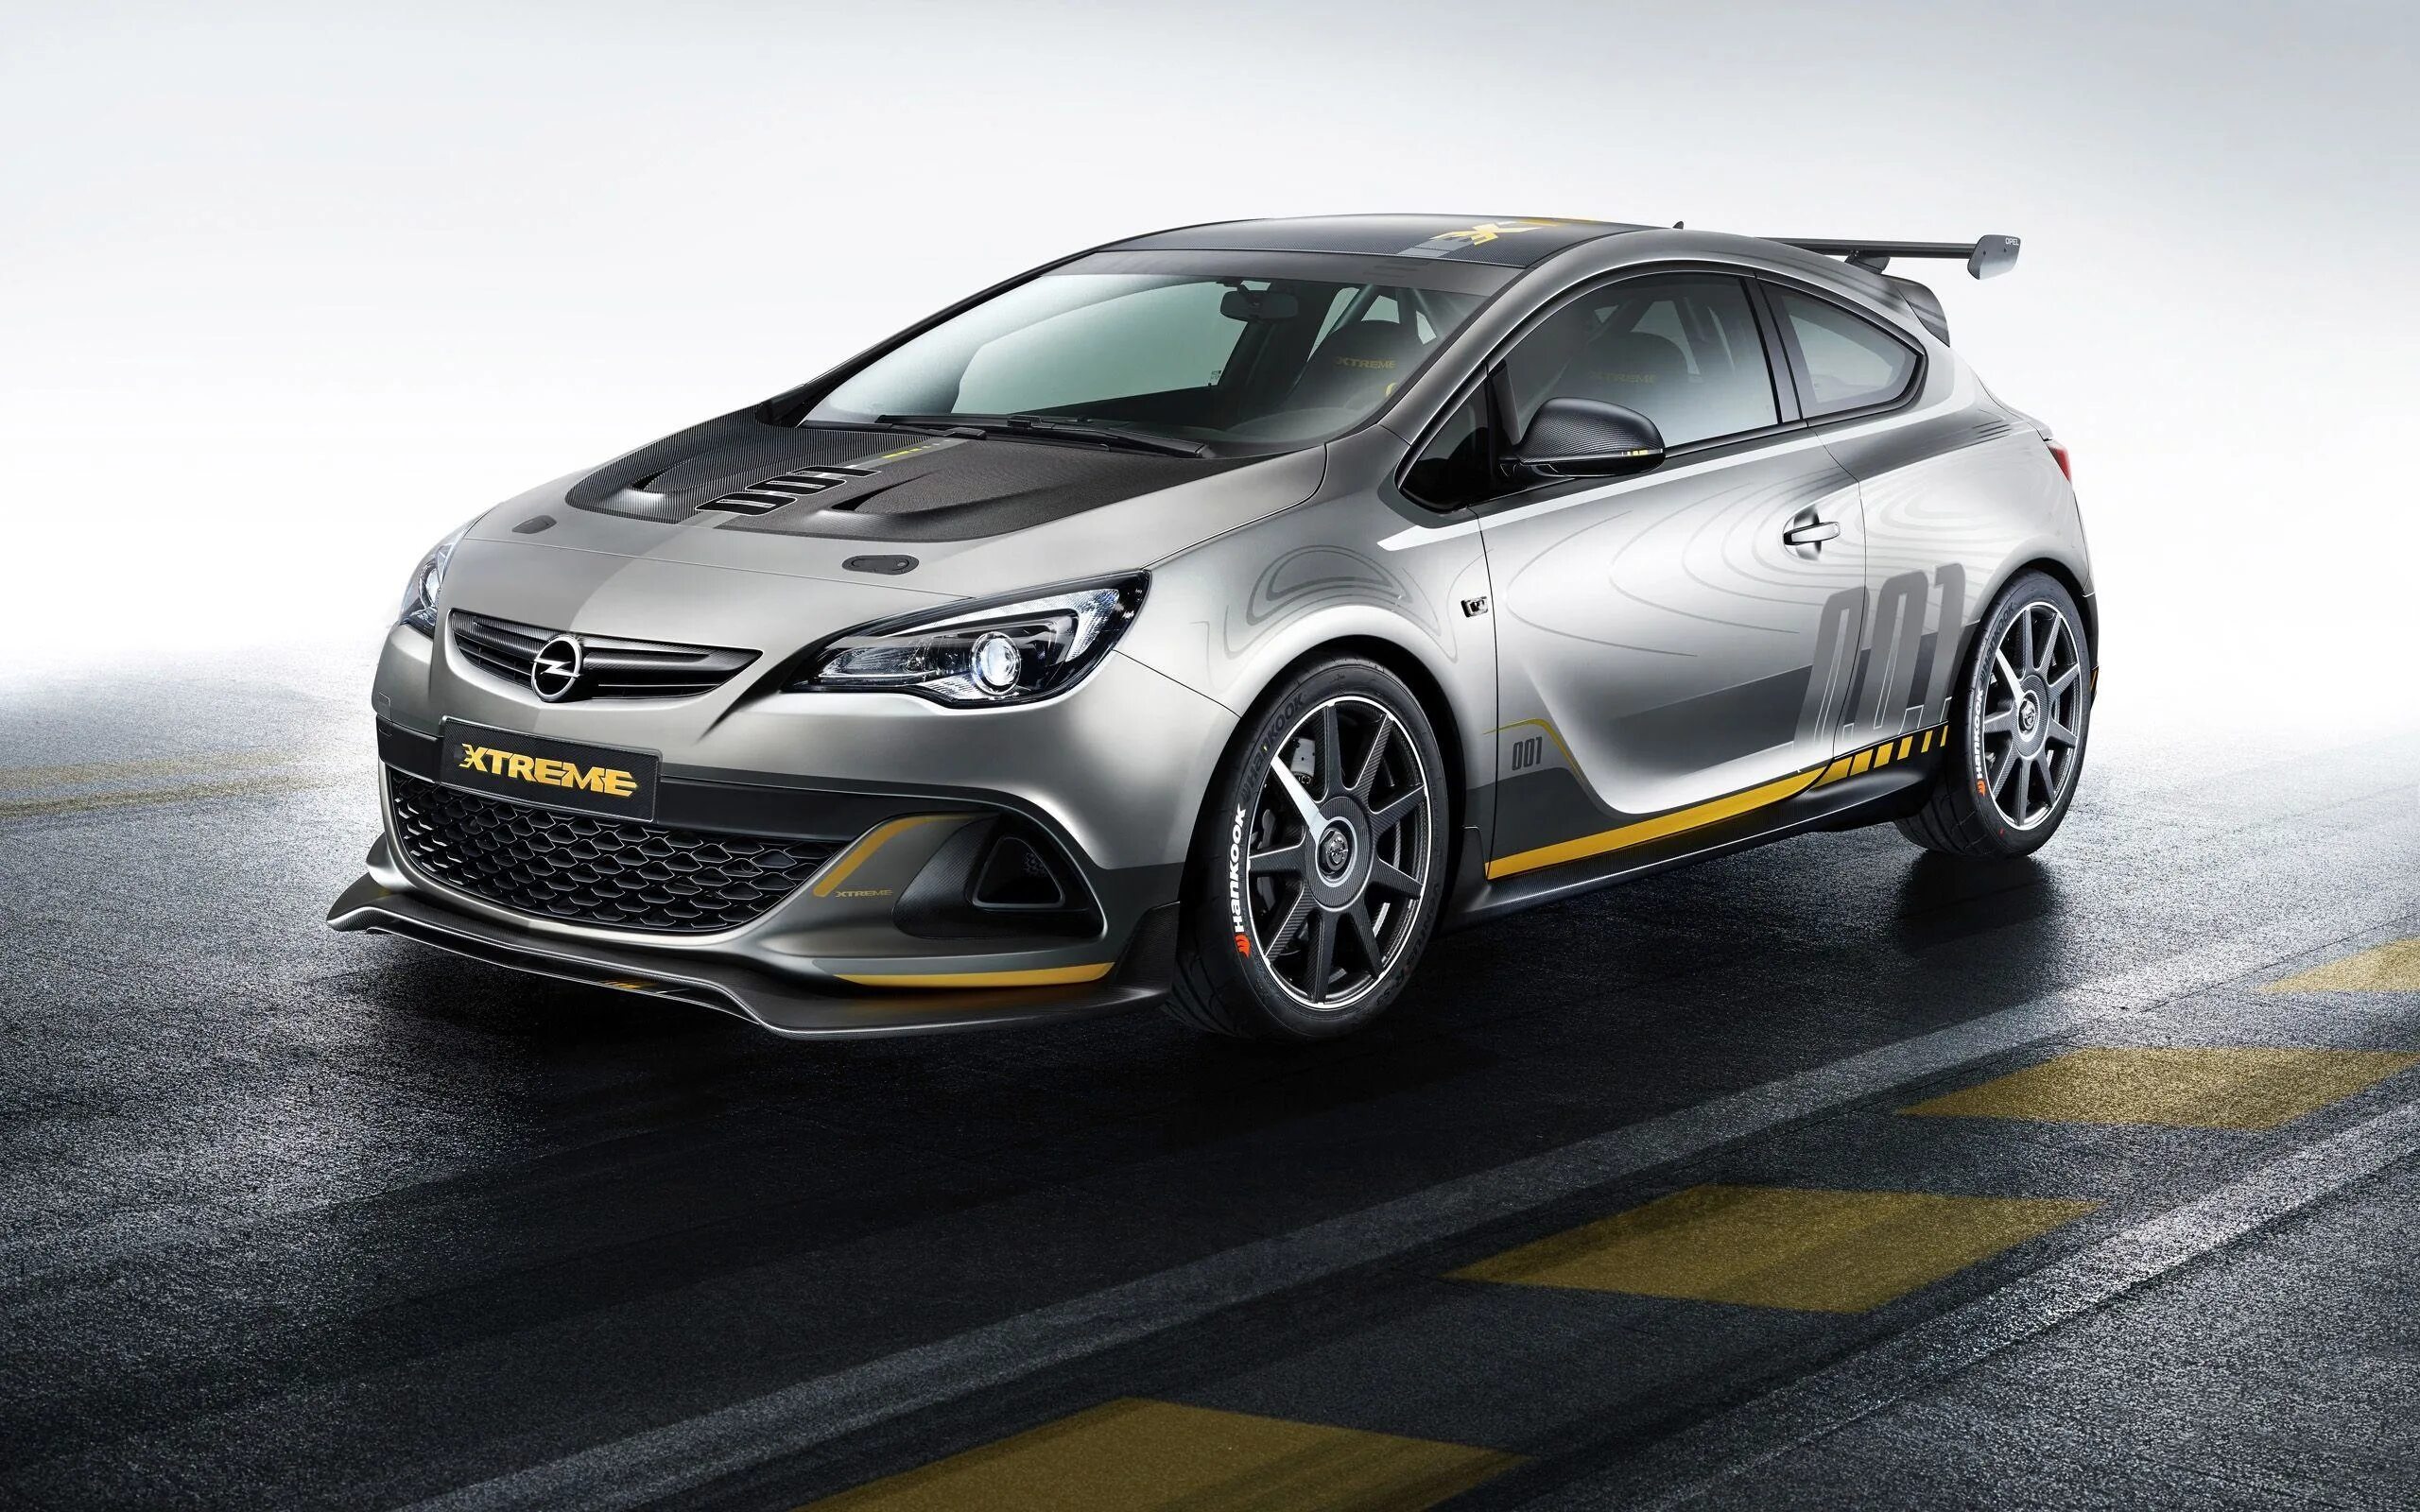 Opel net. Opel Astra OPC. Opel Astra OPC 2014. Opel Astra OPC extreme. Opel Astra OPC 2020.